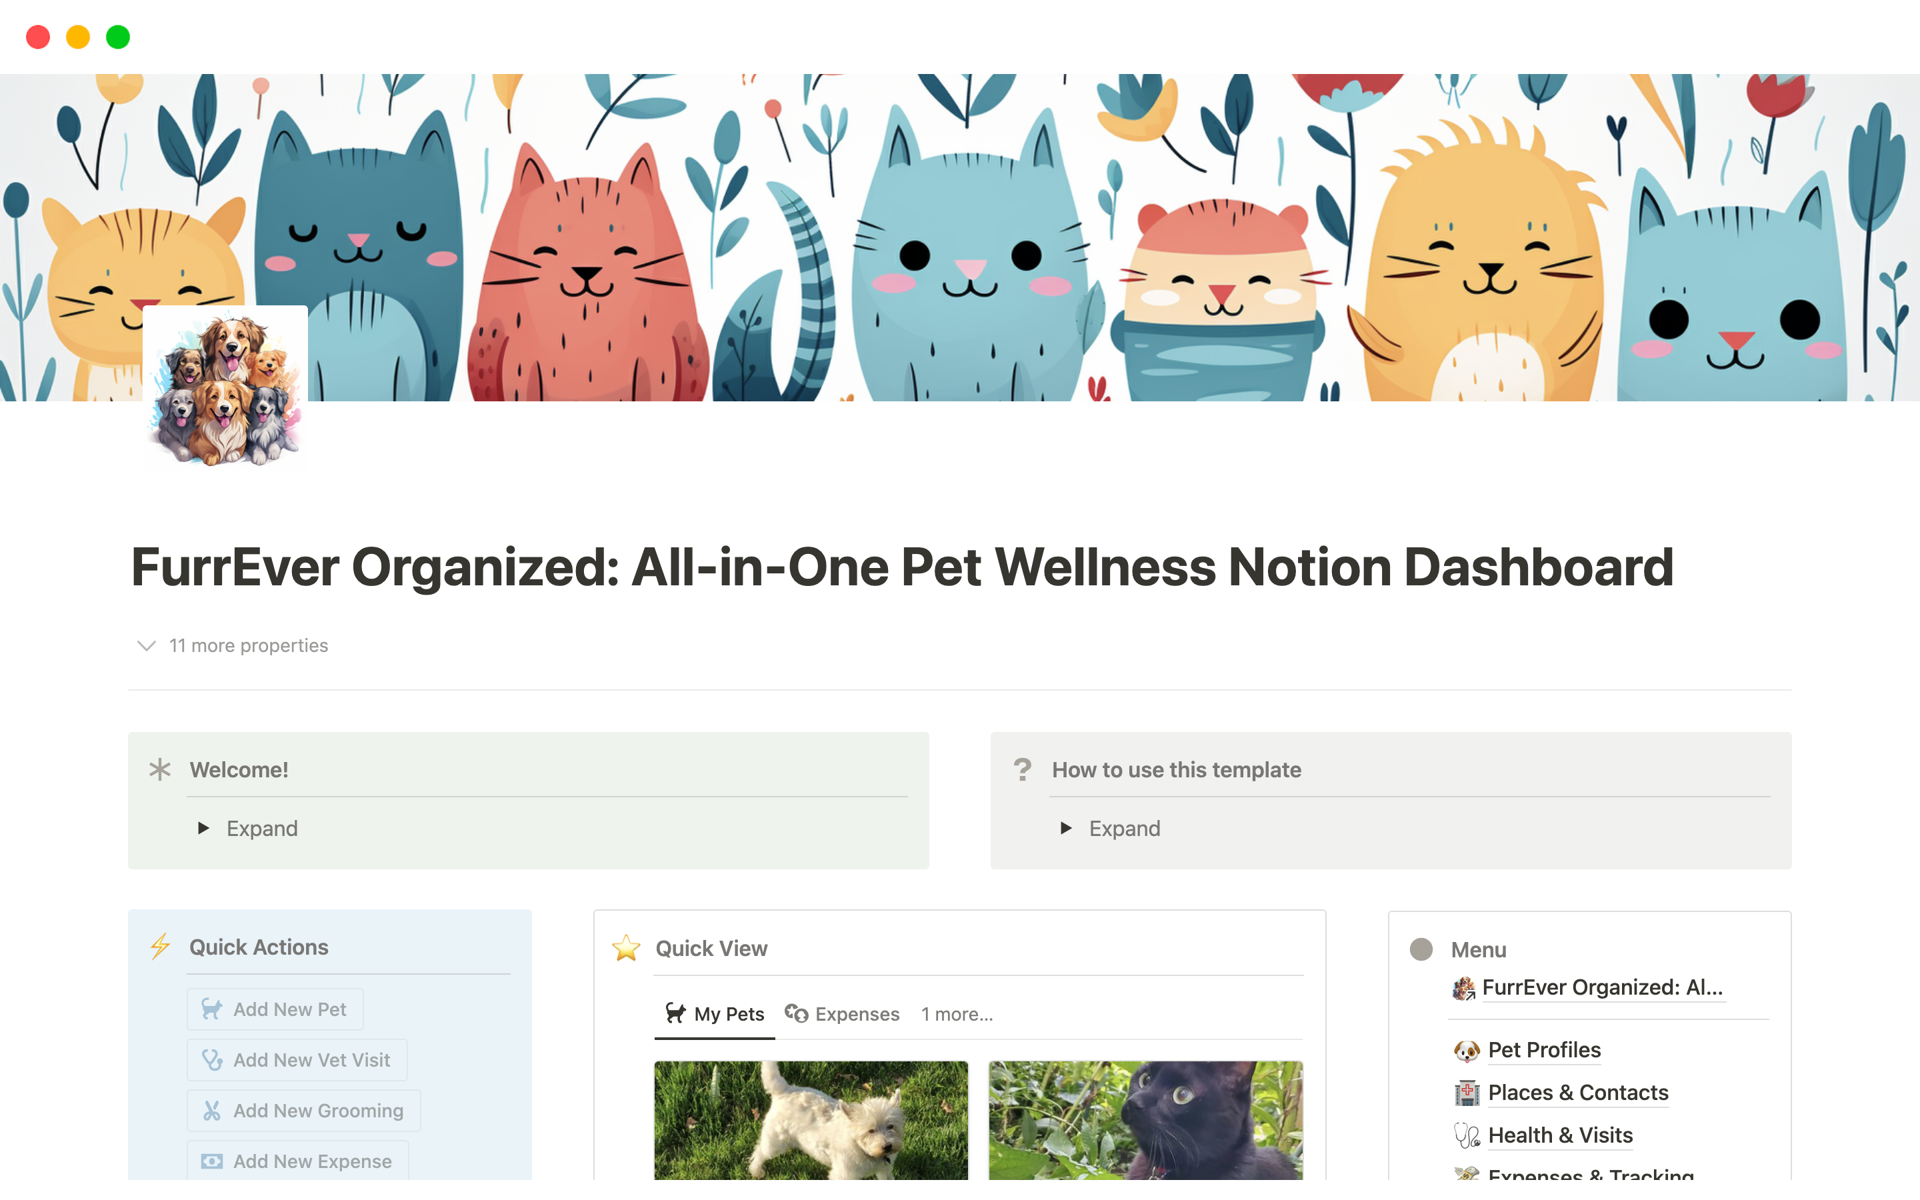 We help pet owners transform their pet care experience with the unique mechanism of FurrEver Organized - the All-in-One Pet Wellness Notion dashboard + $50 risk-free guarantee